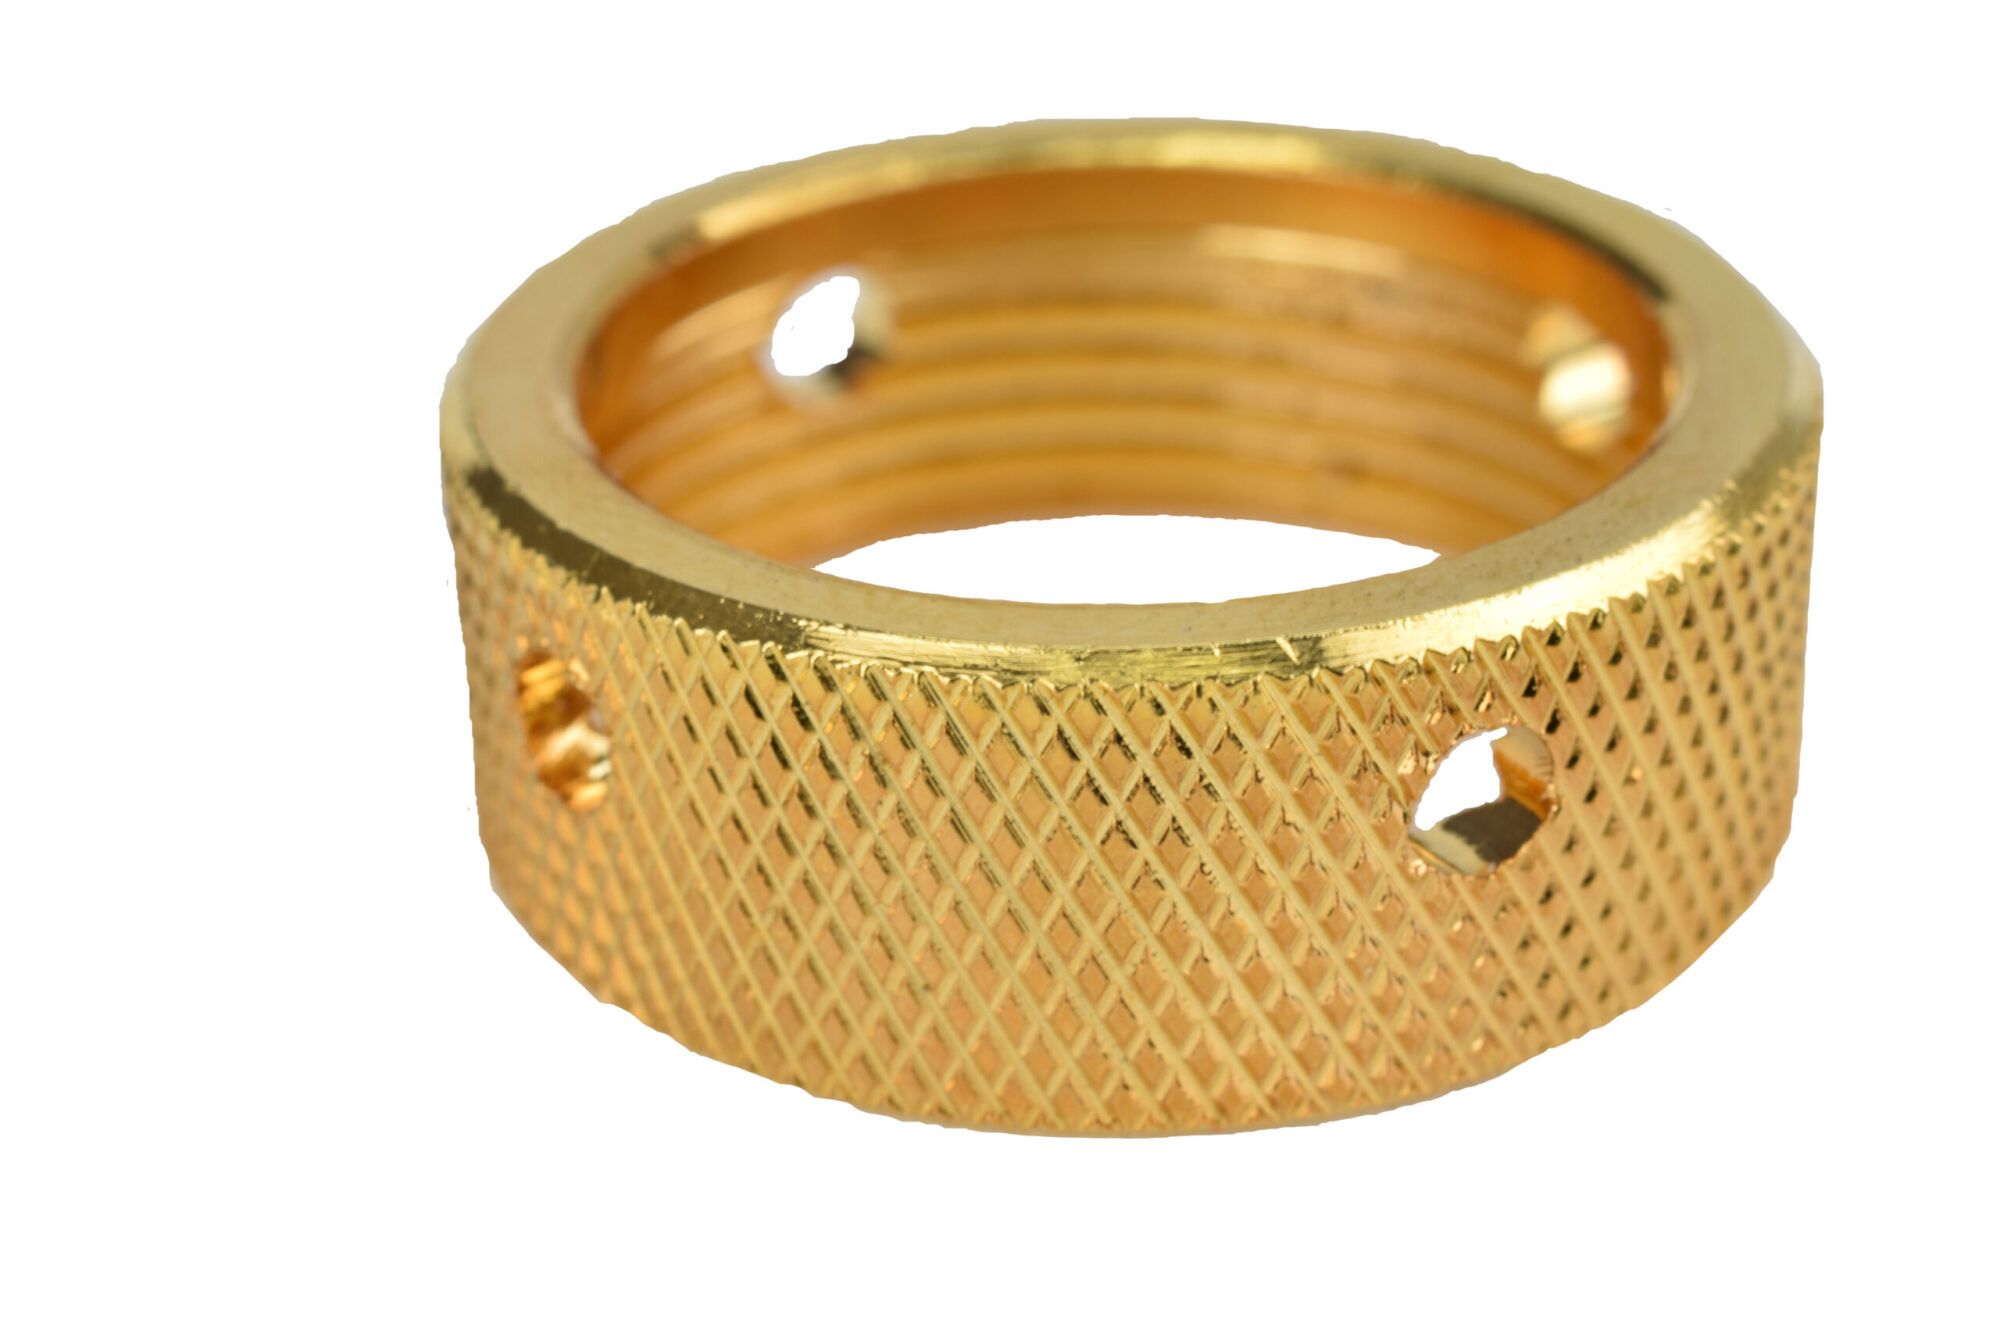 1332G Coupling Nut - PVD Gold Plated